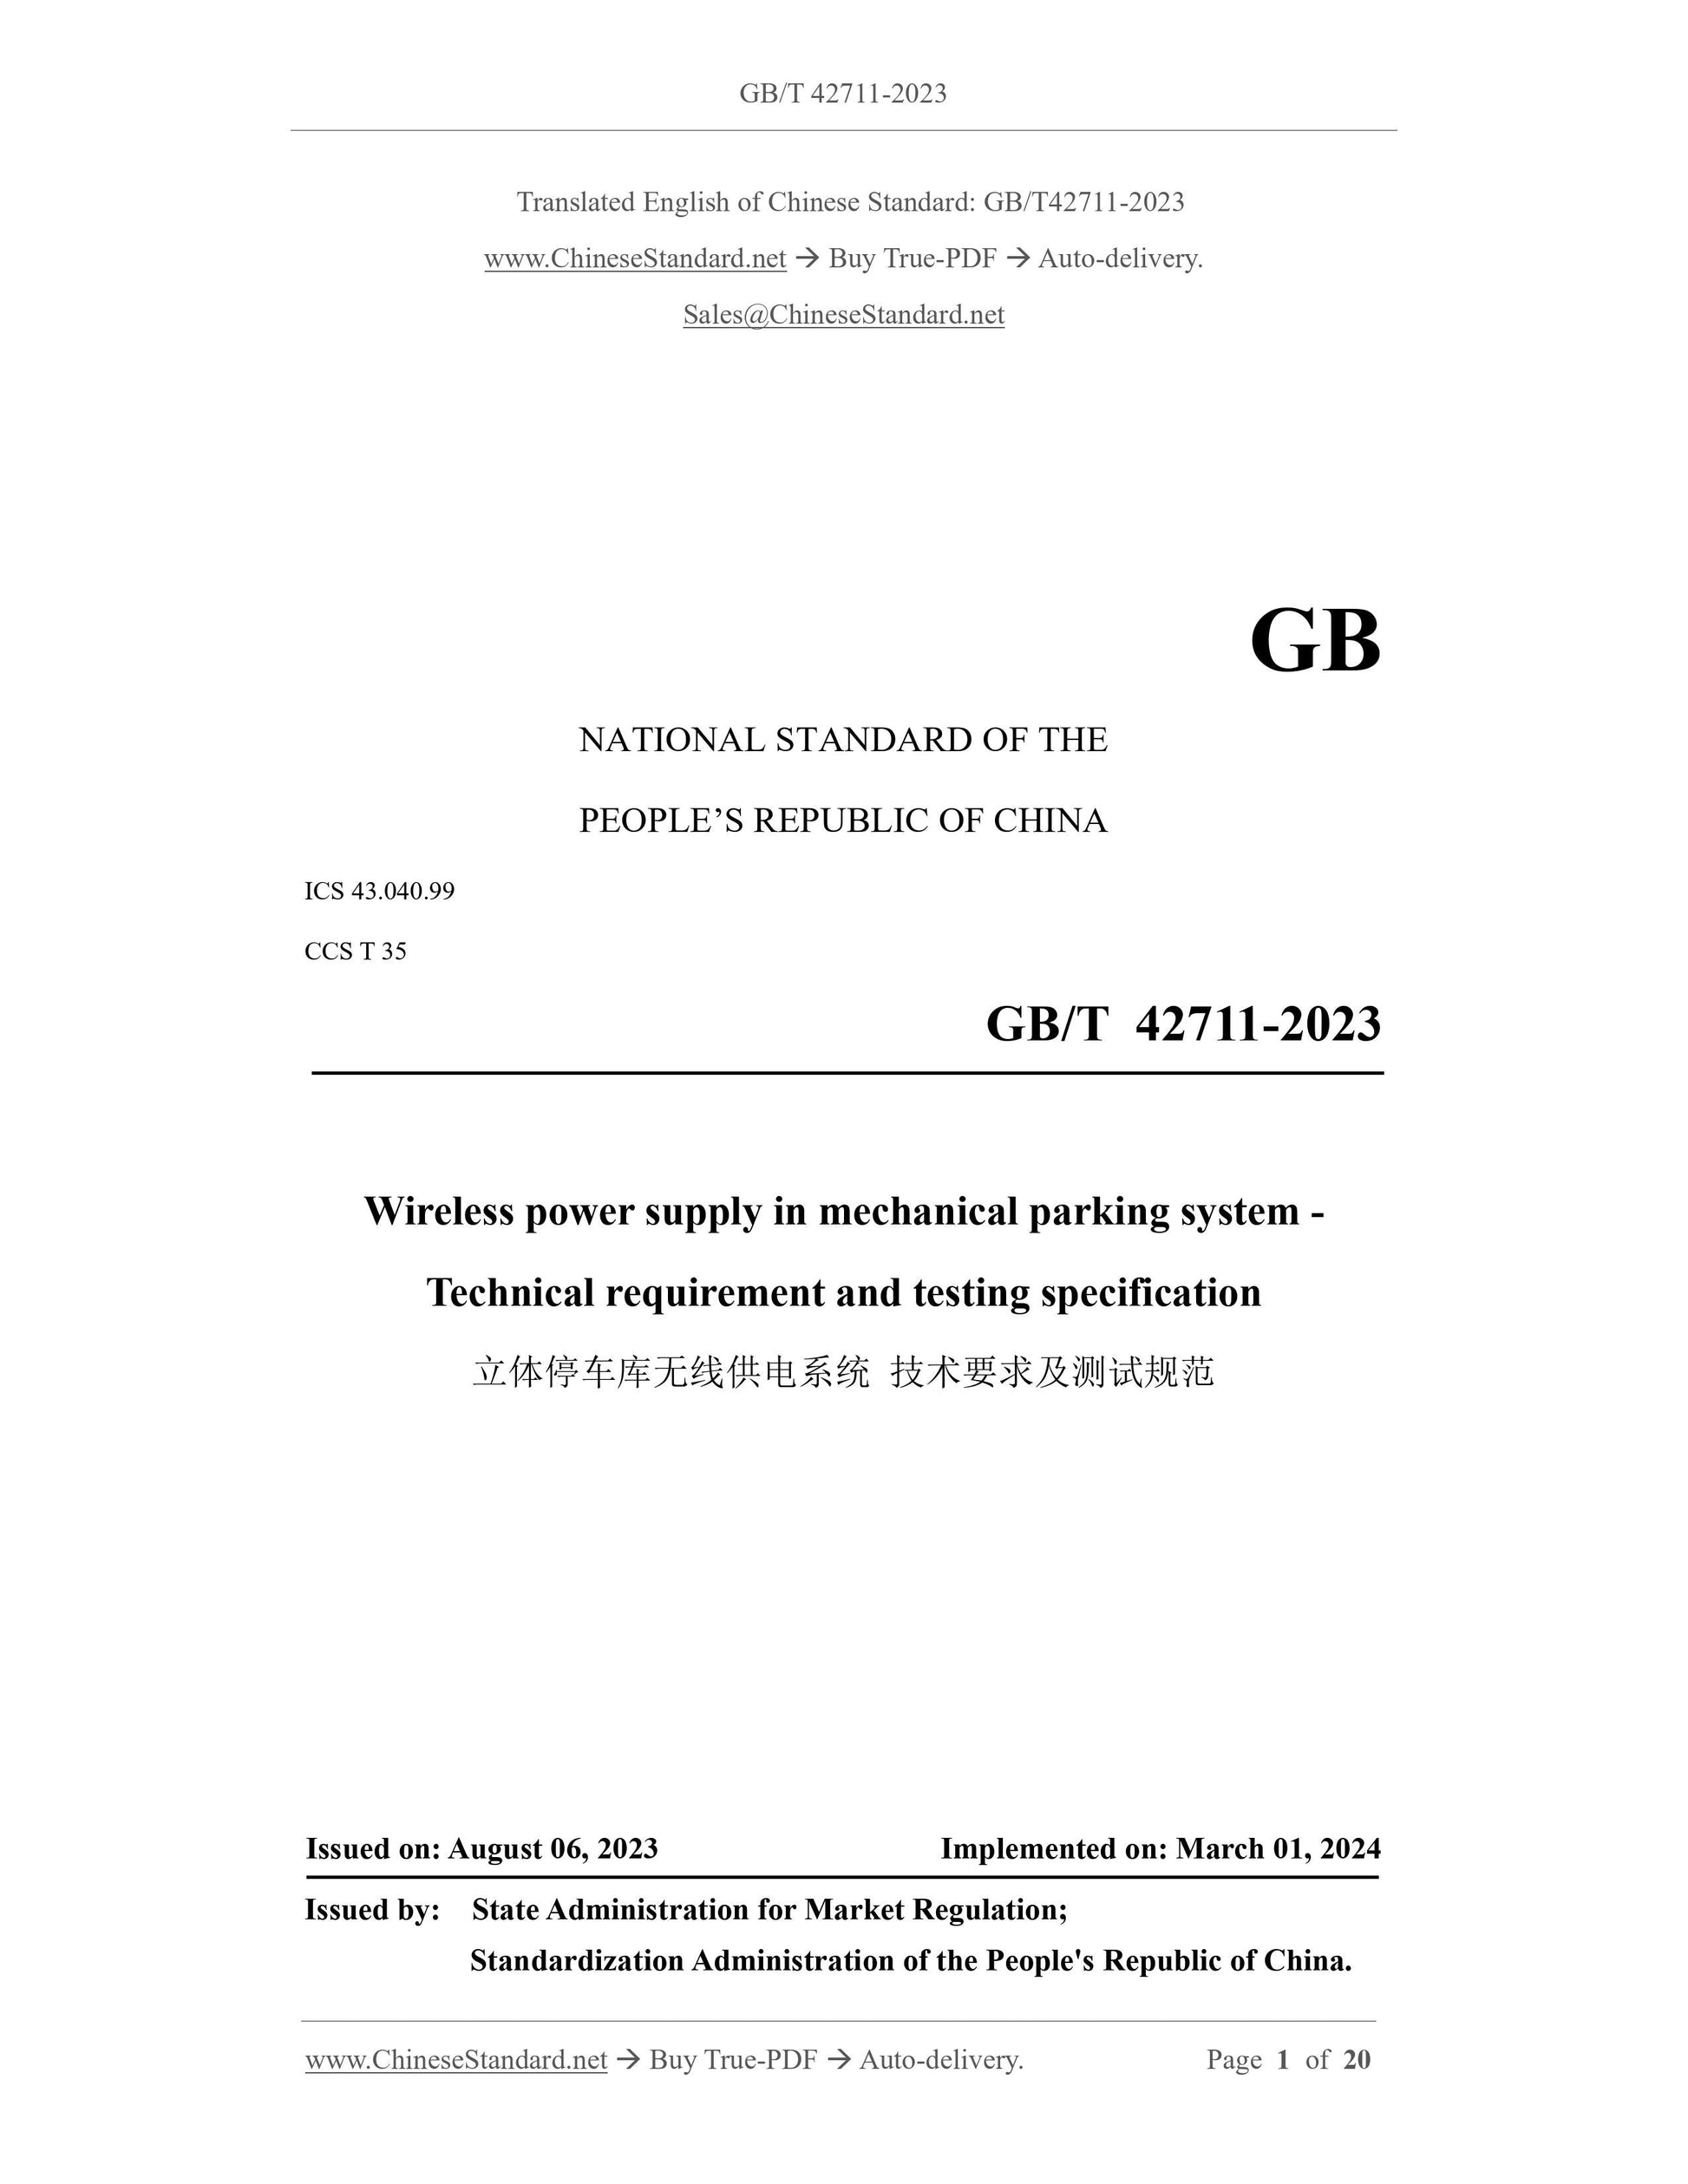 GB/T 42711-2023 Page 1